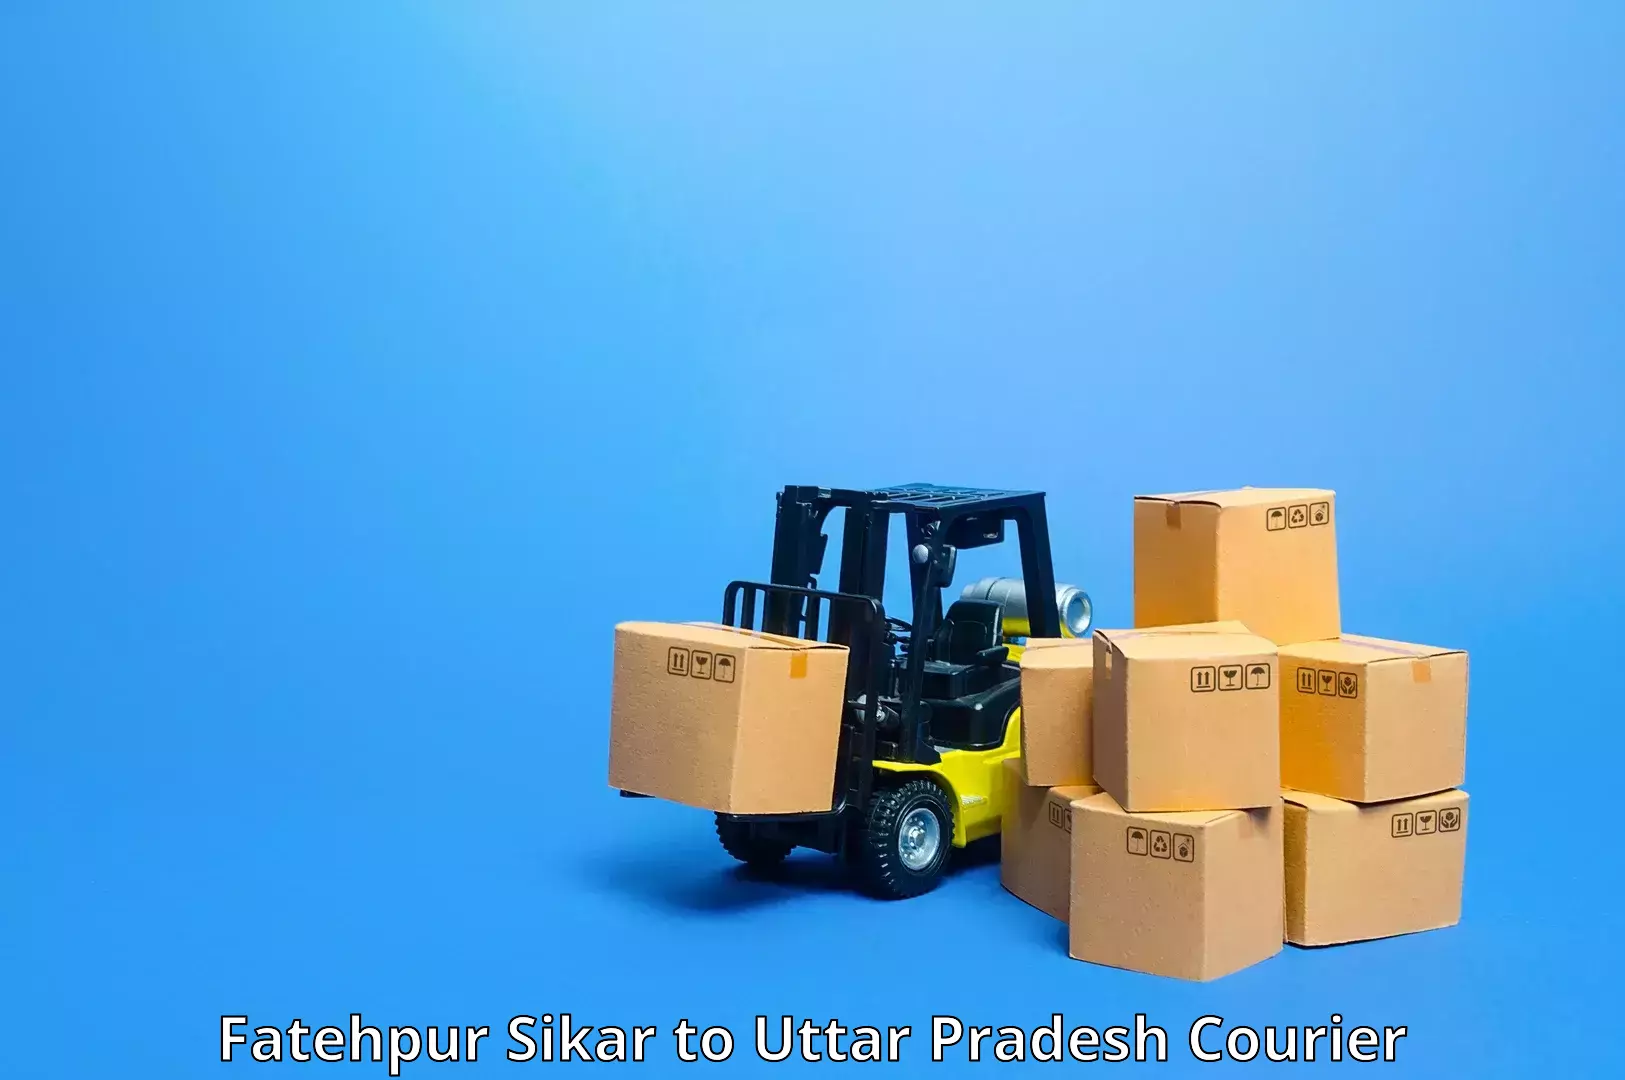 Easy access courier services Fatehpur Sikar to Barabanki